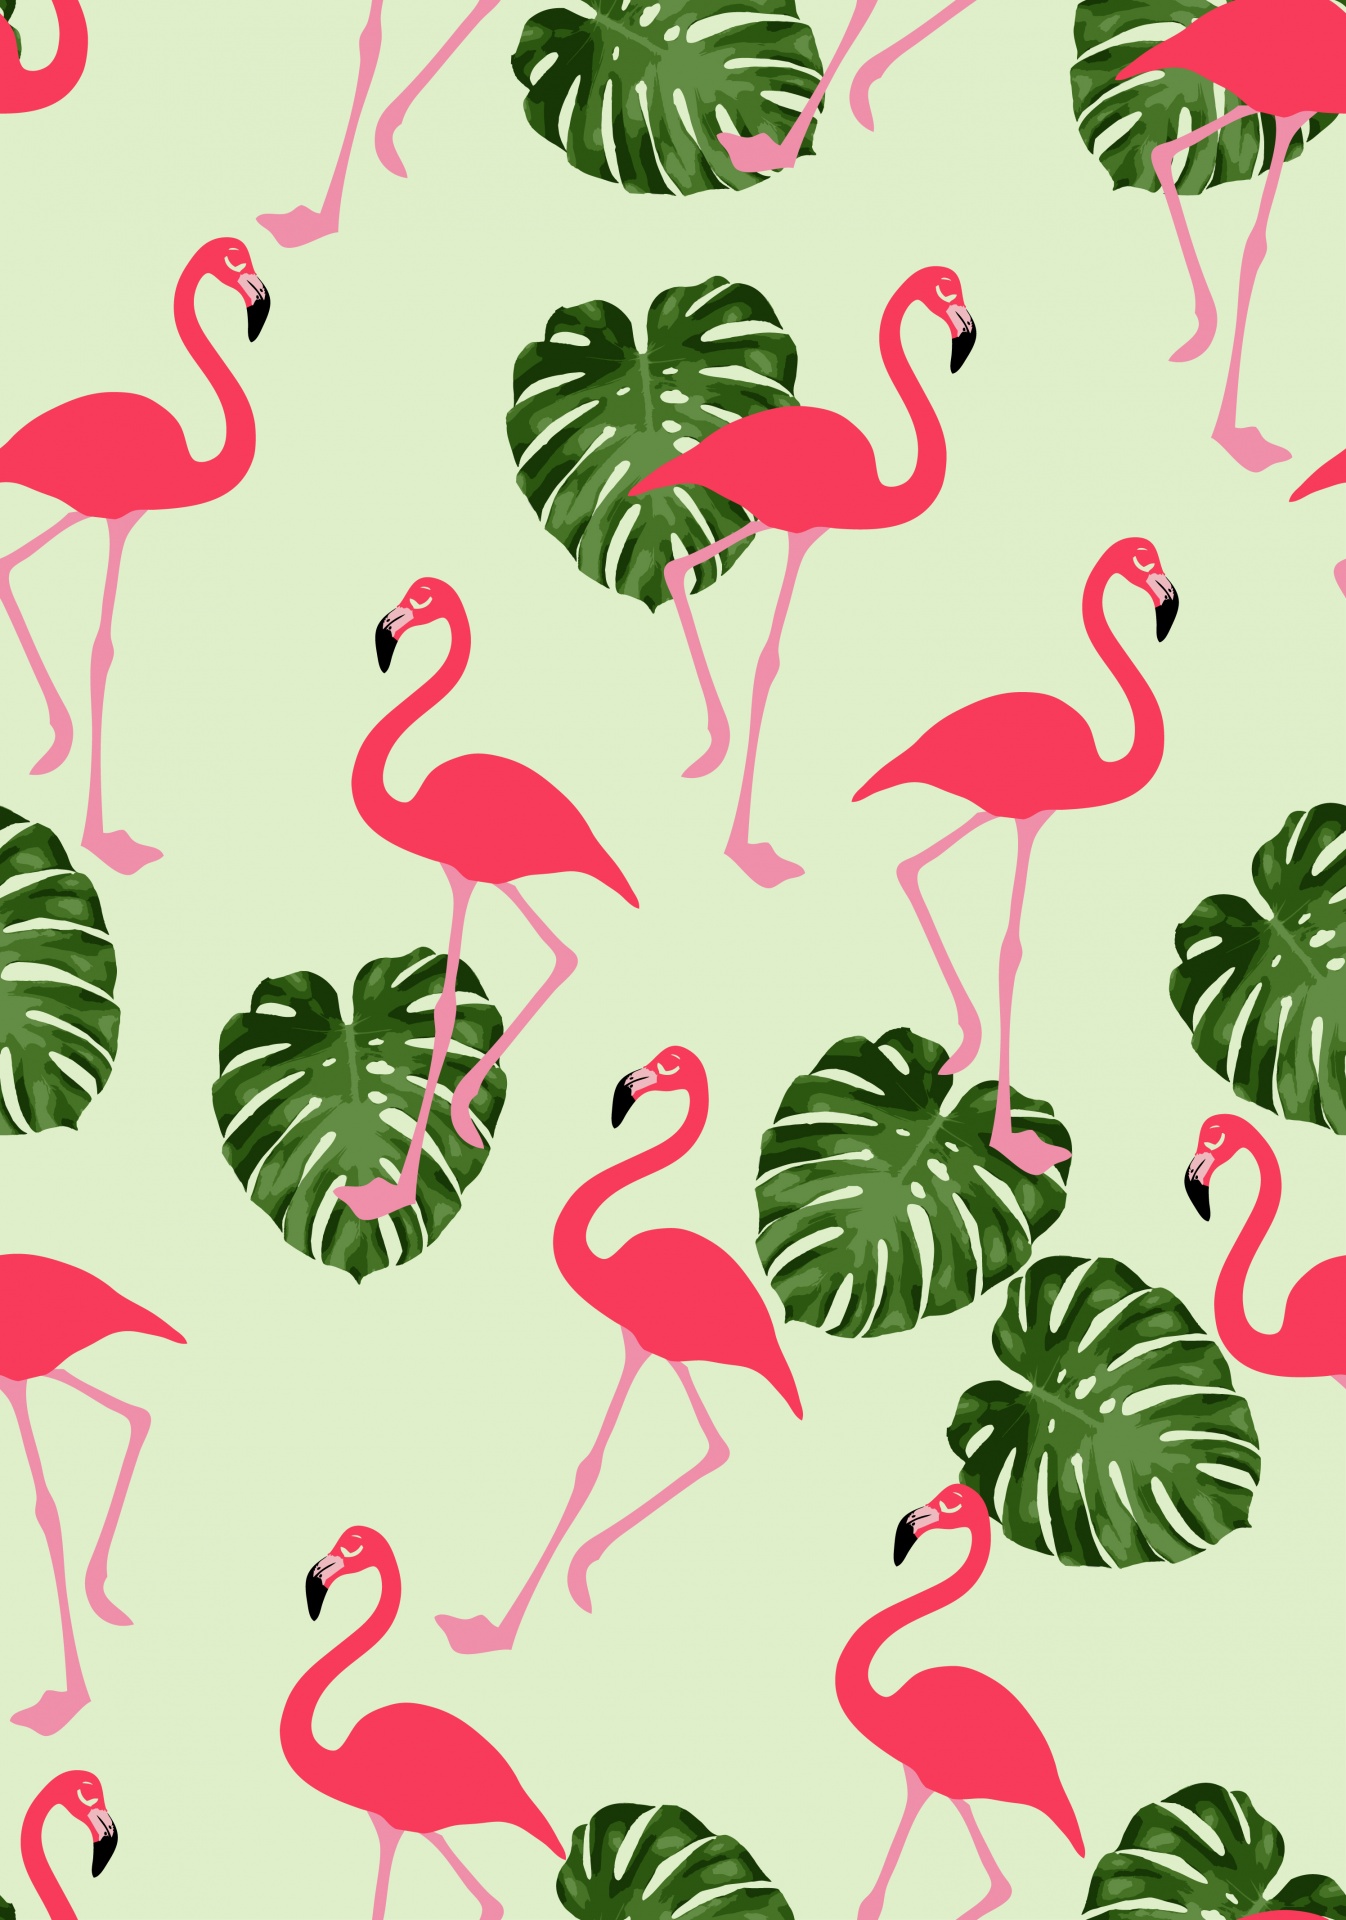 Flamingo Wallpaper Paper Free Photo - Cell Phone Wallpaper Flamingo - HD Wallpaper 